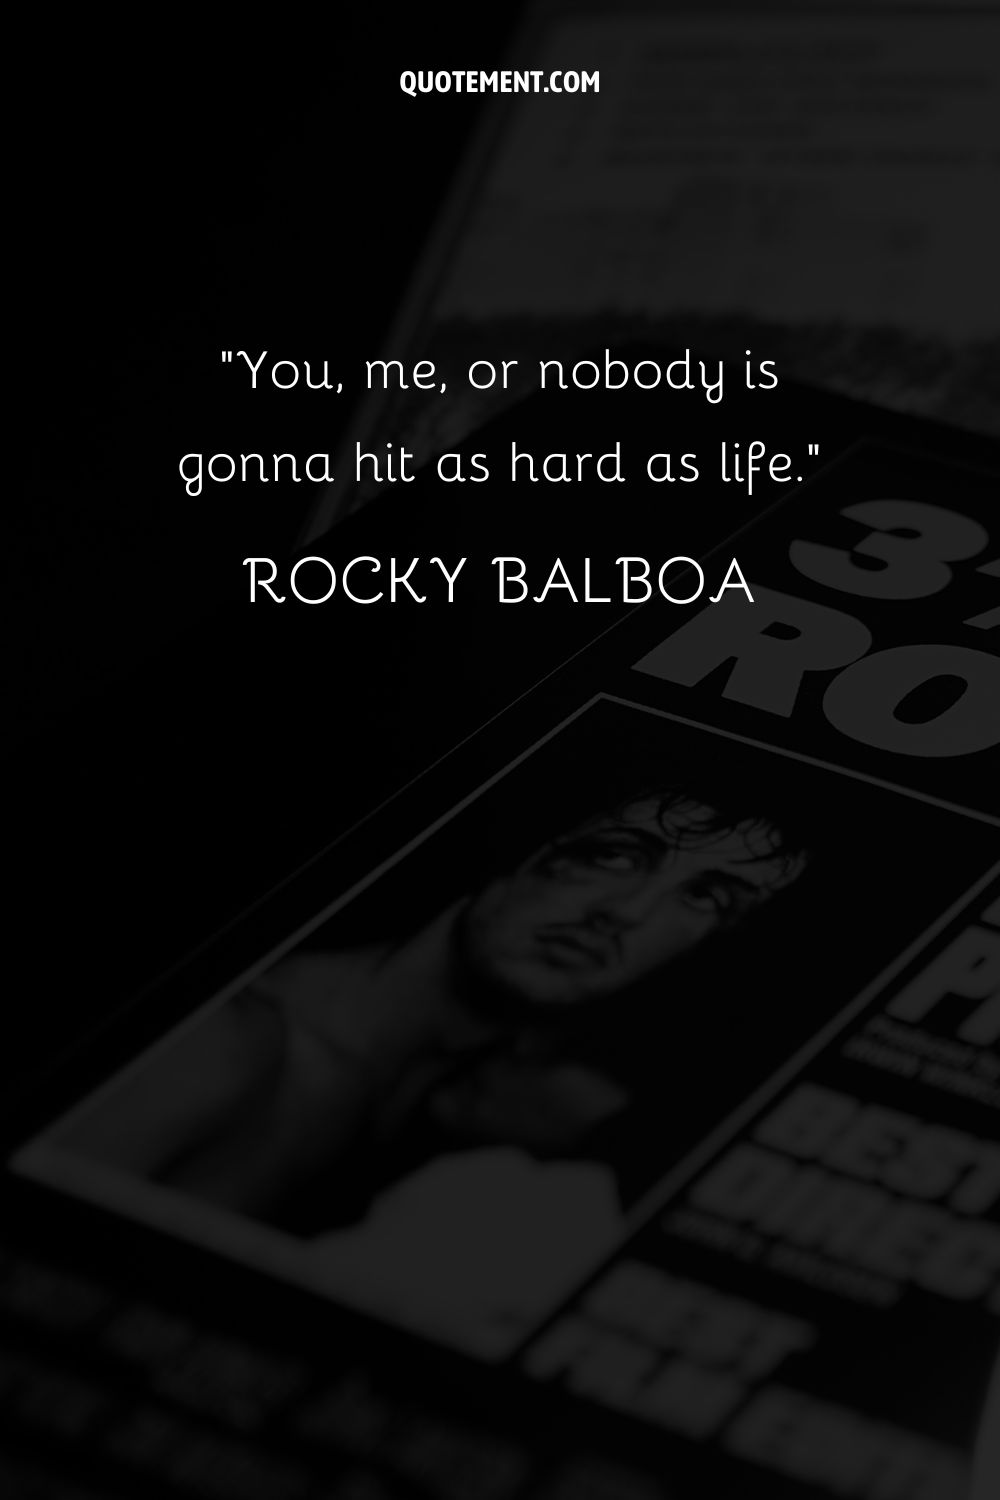 Stalone in newspaper image representing Rocky life quote
